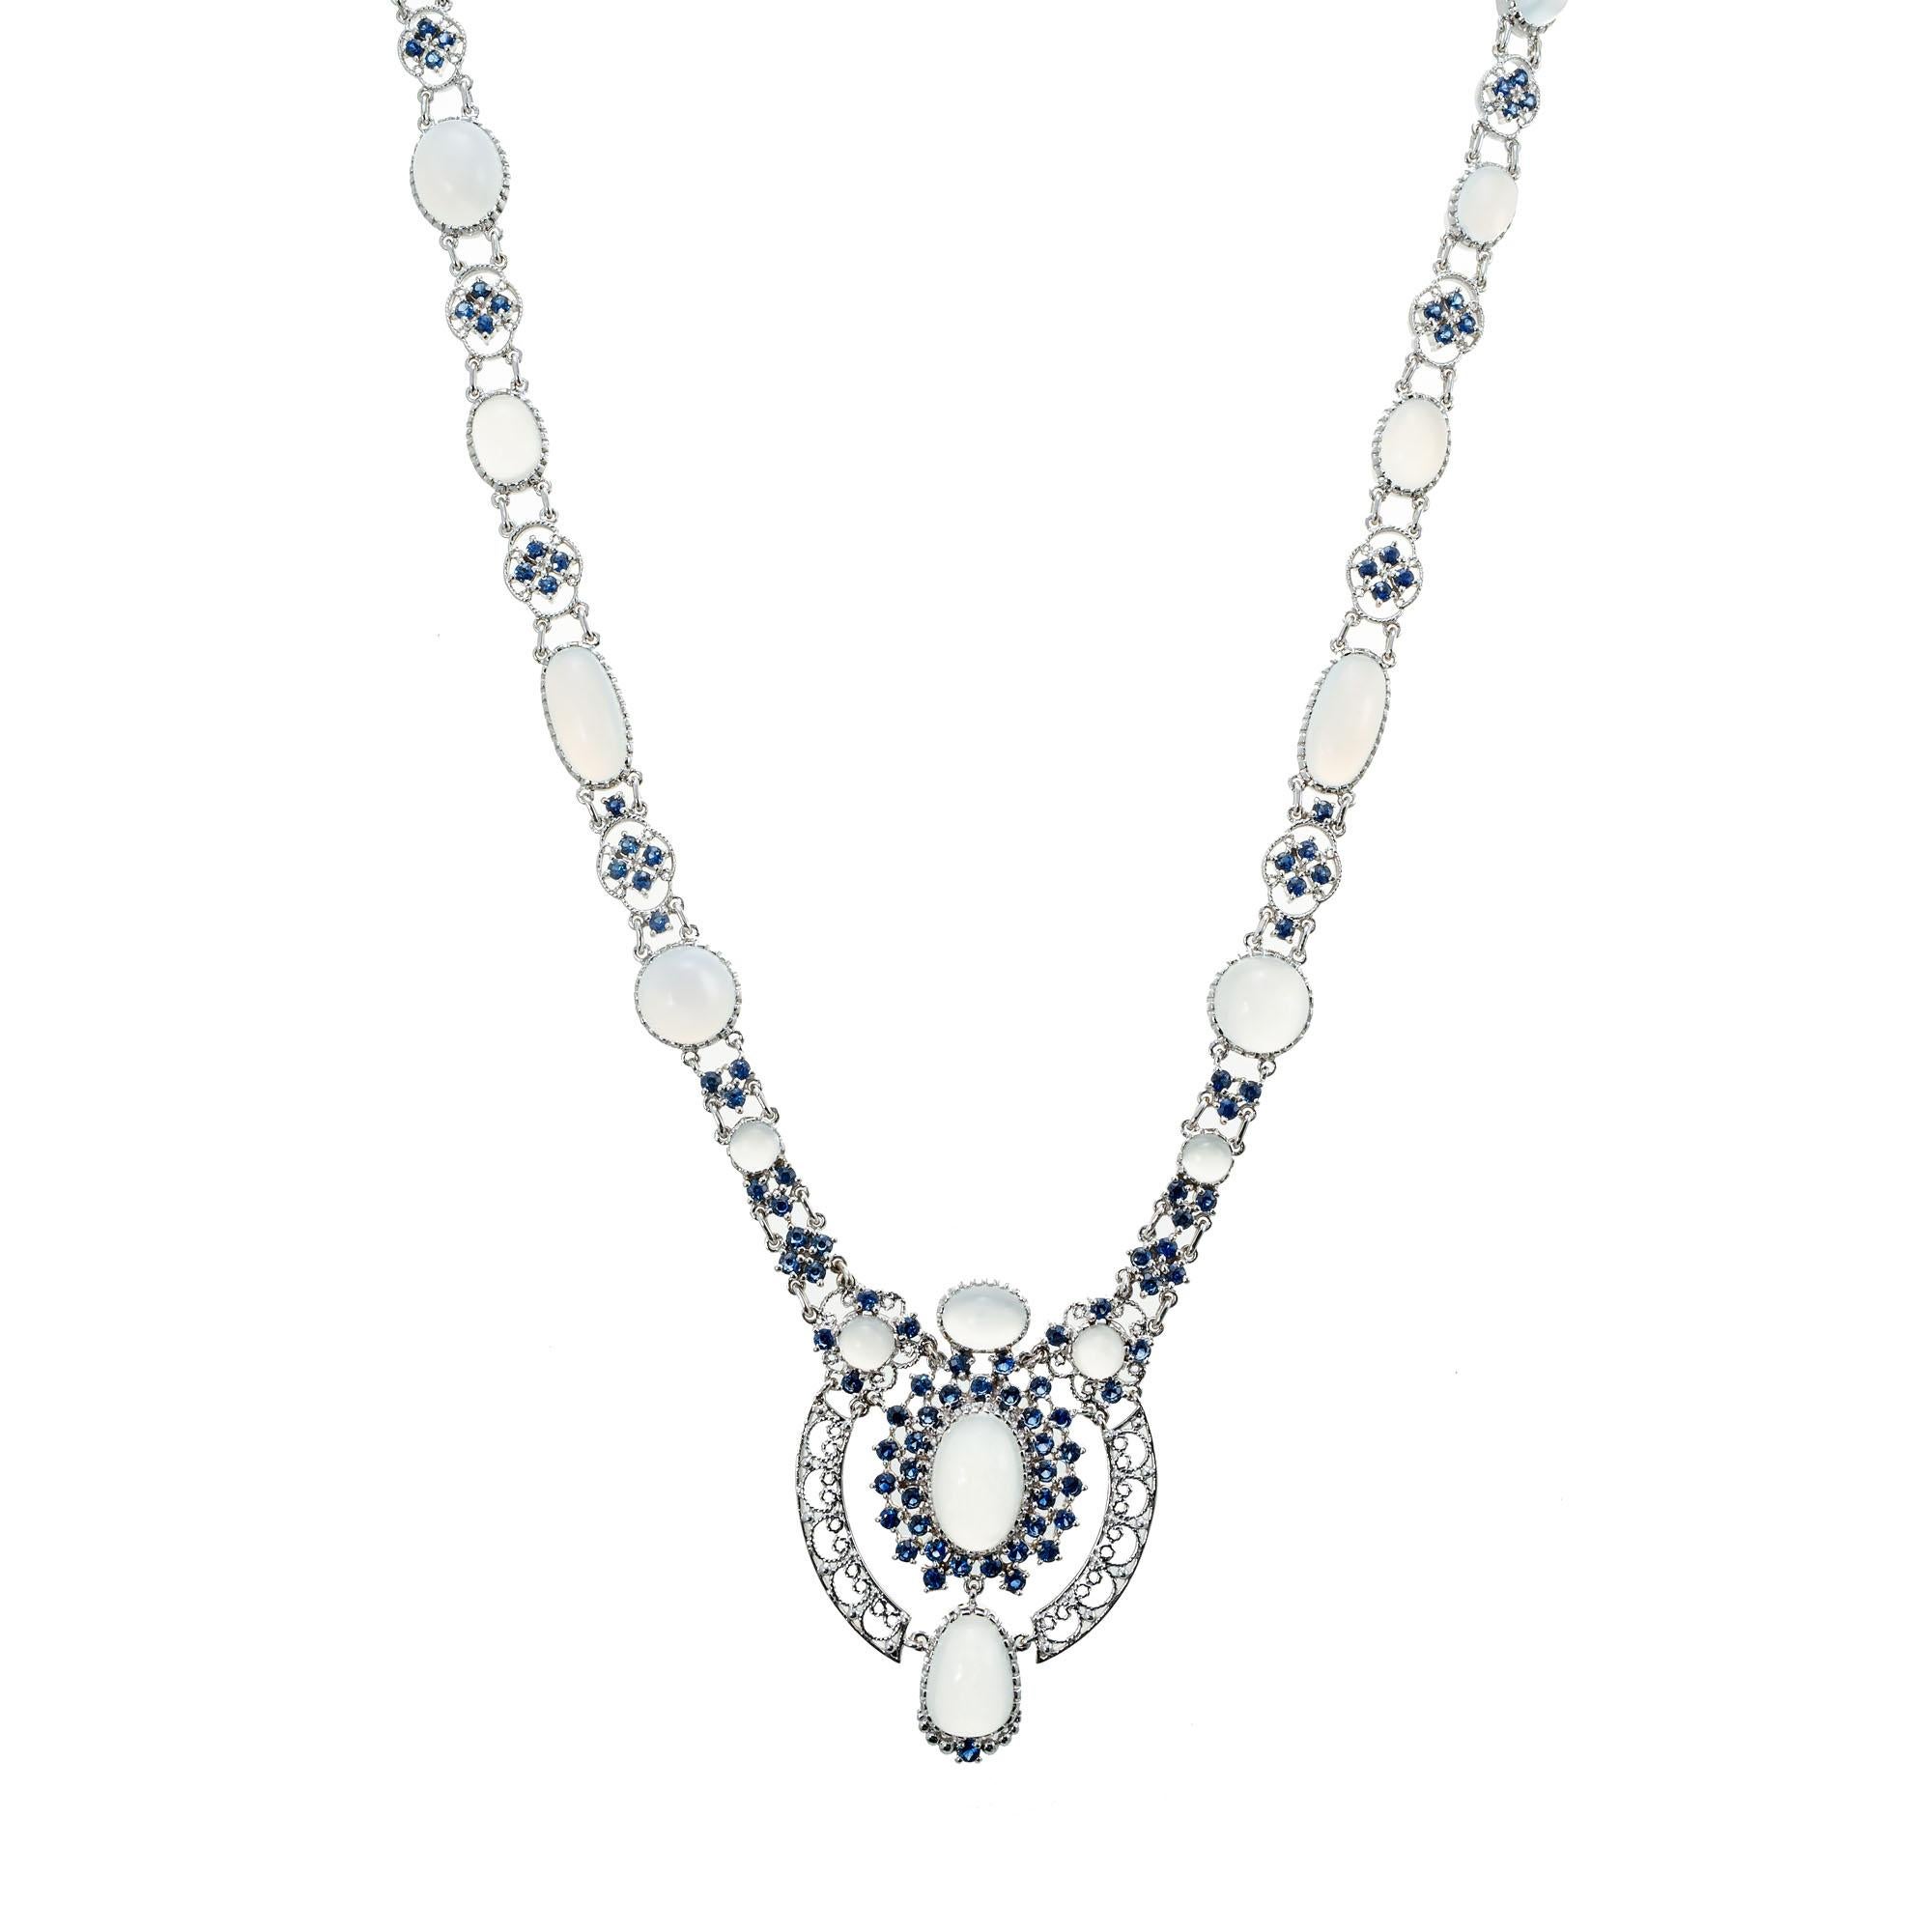 Museum of Modern Art genuine Moonstone and Sapphire pendant necklace. All genuine stones in 14k white gold. 17.5 inches. MMA pieces are usually remakes of important or historical pieces, we do not know the history of this one.

19 Moonstone, clear